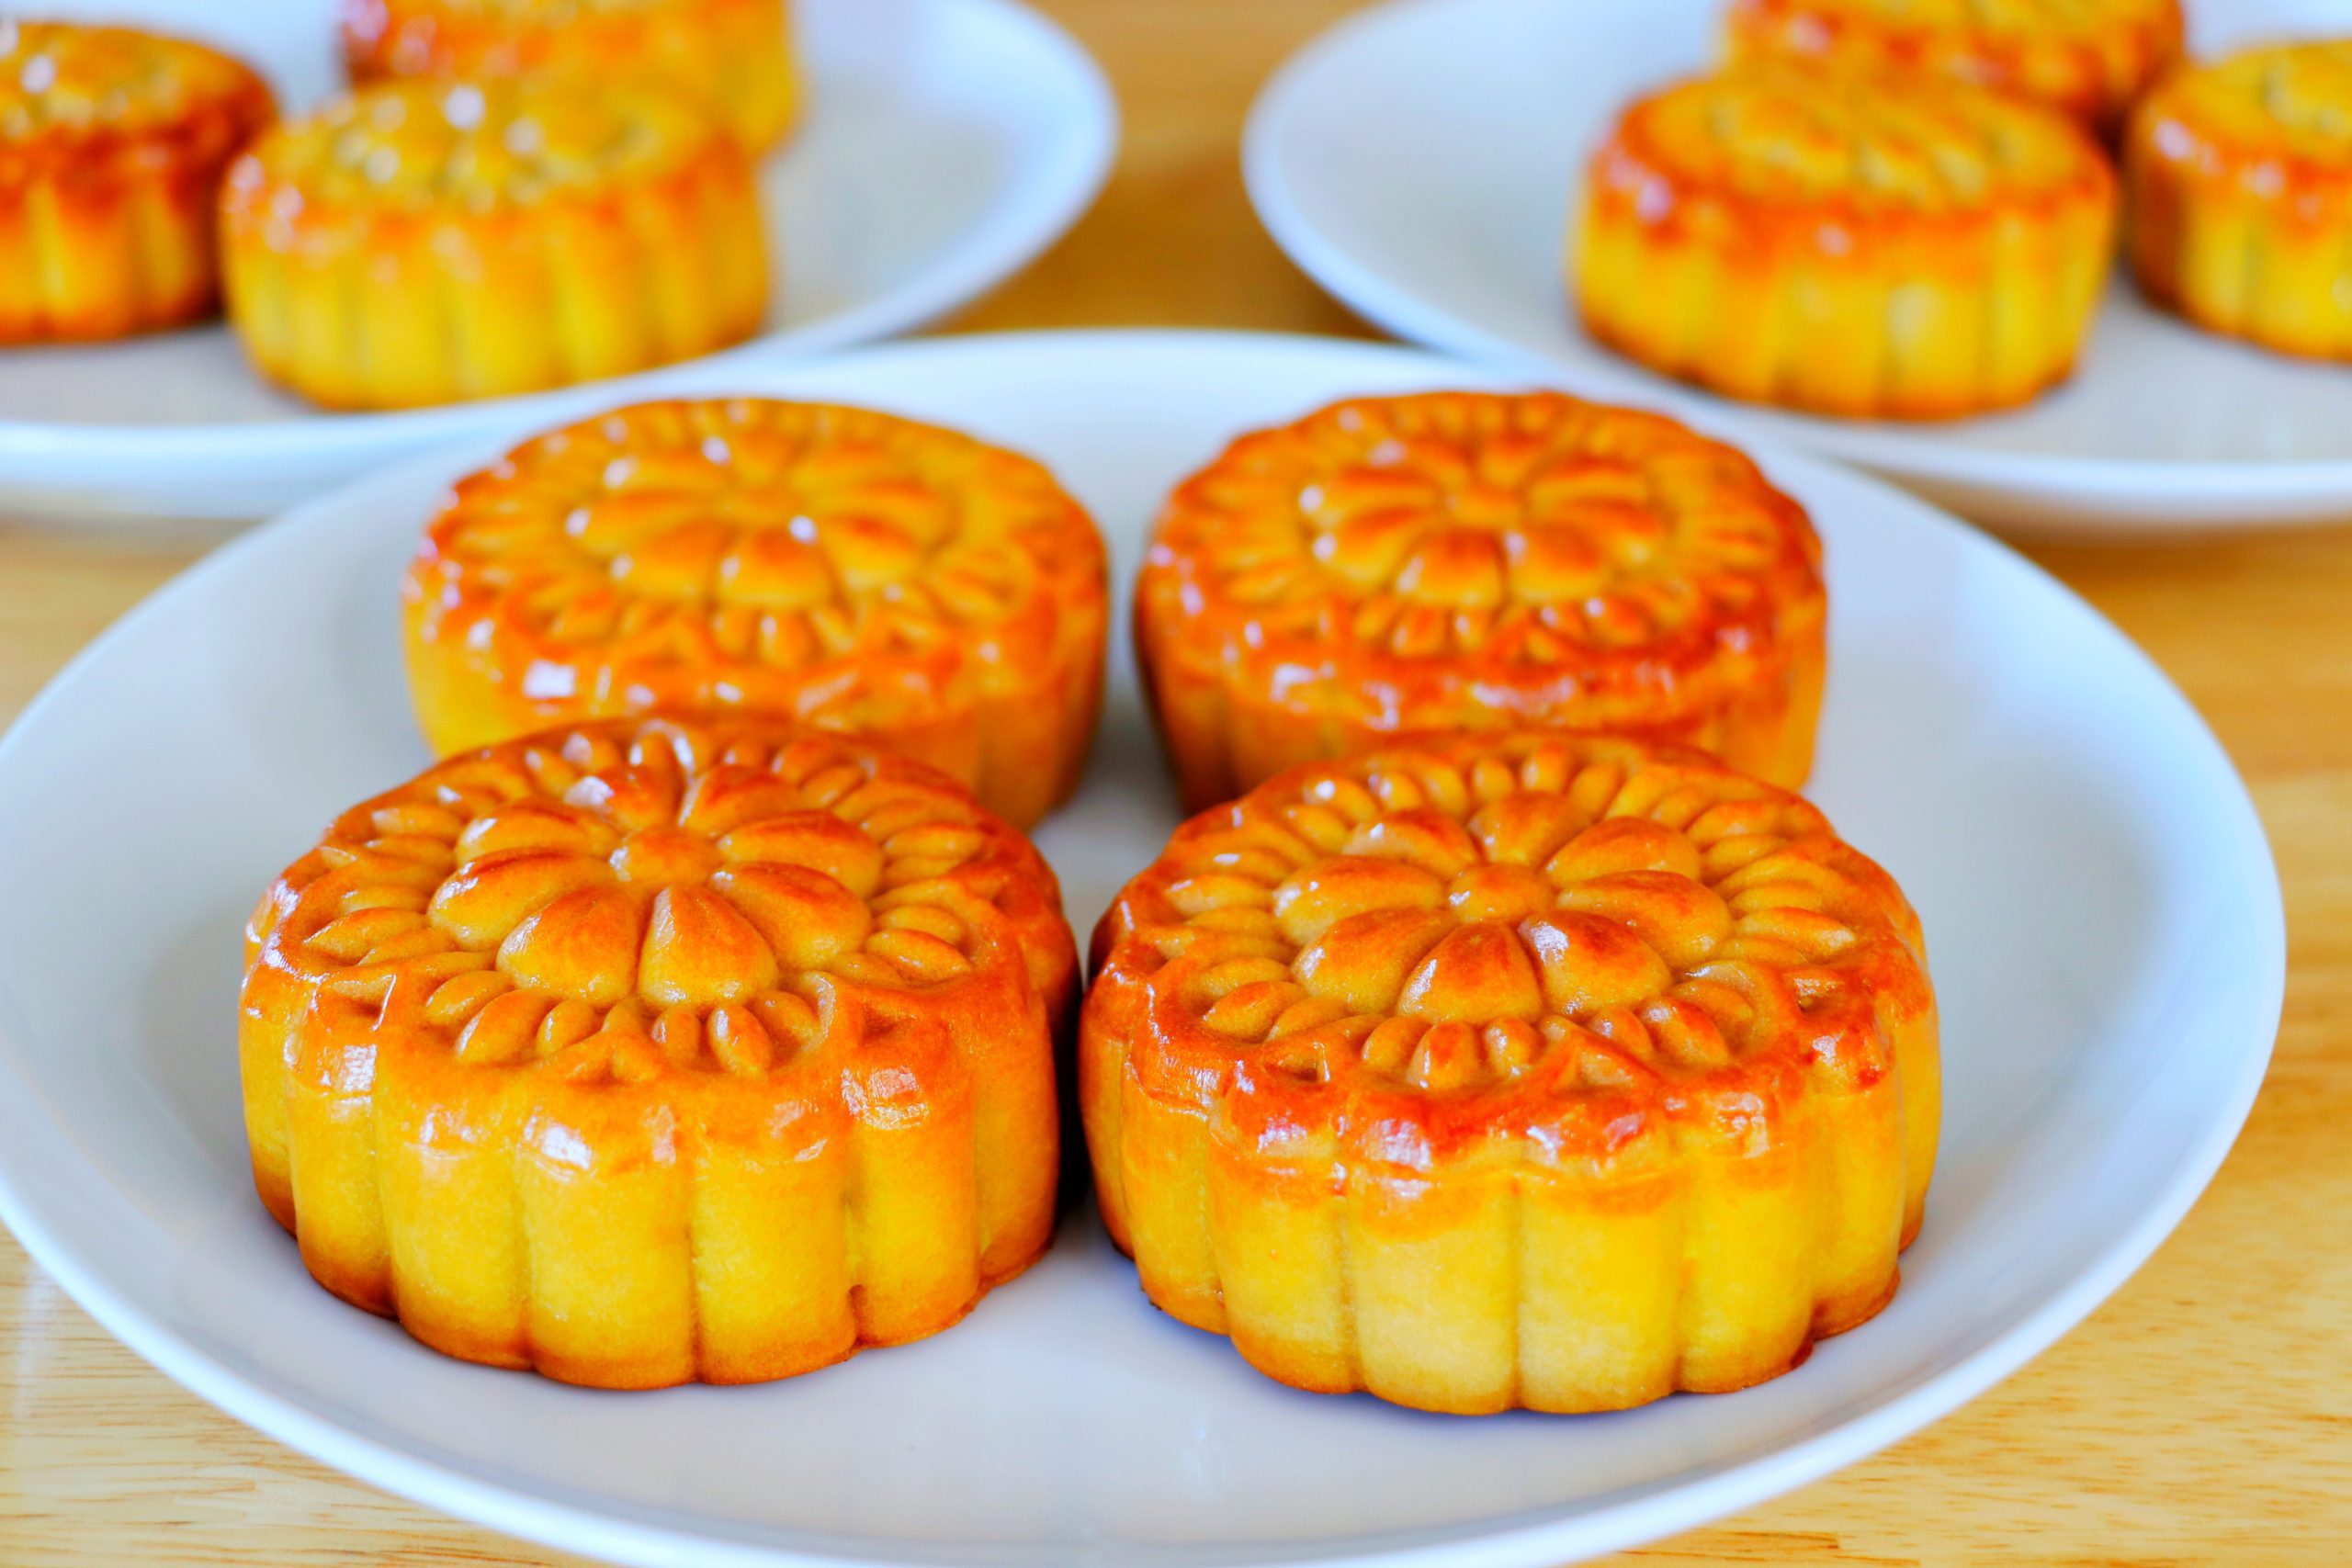 A selection of some unusual mooncakes from Asia